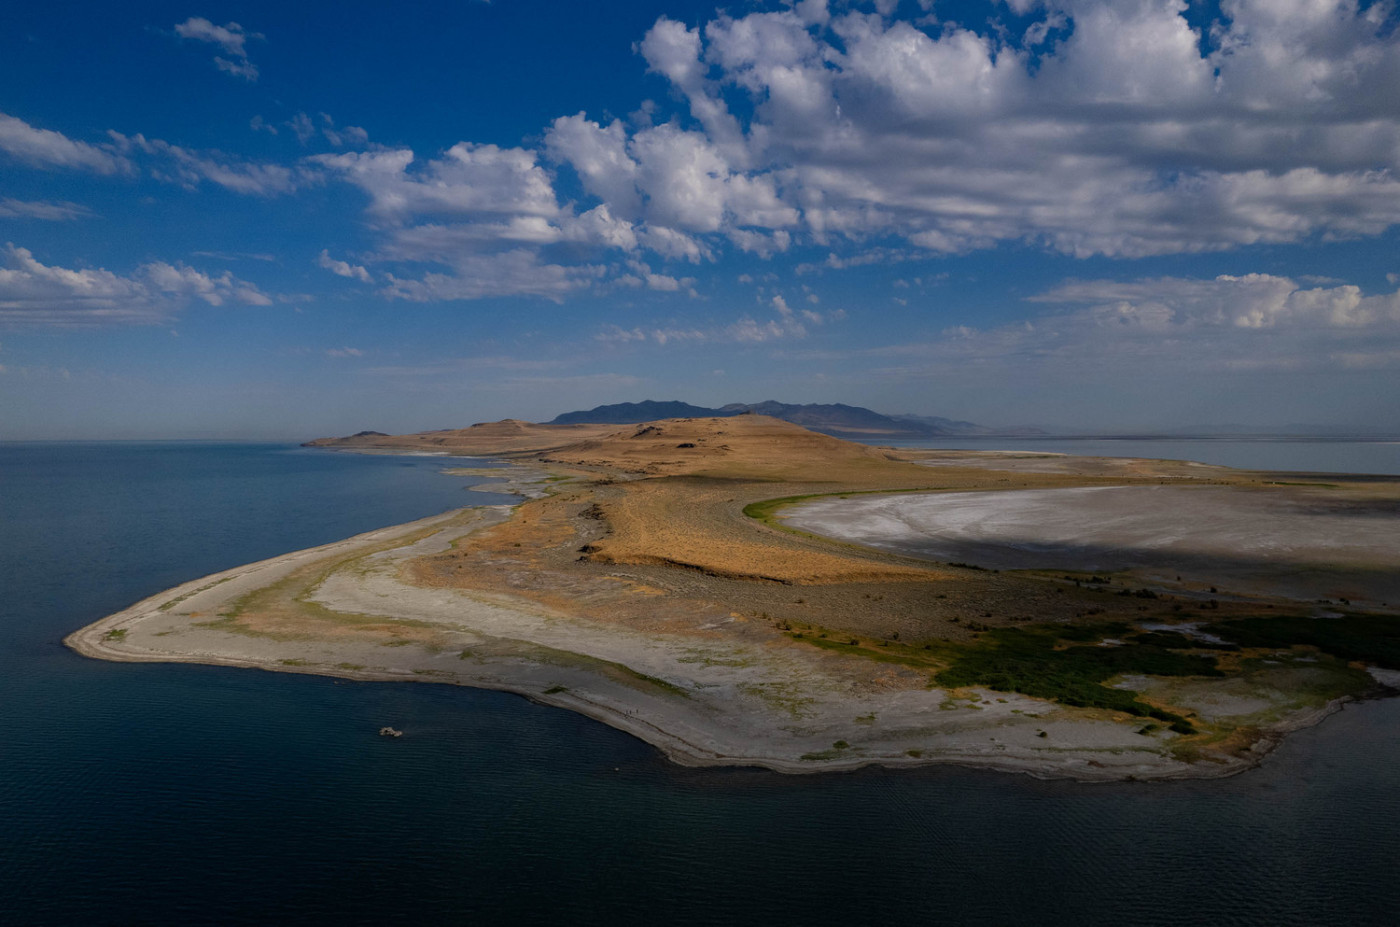 Fremont Island, the Great Salt Lake’s third-largest island, on July 18, is about 2 miles wide and 6 miles long, with about 3,000 acres to explore. The Utah Division of Forestry, Fire and State Lands will manage the island under a conservation easement. (Photo: Francisco Kjolseth, The Salt Lake Tribune)